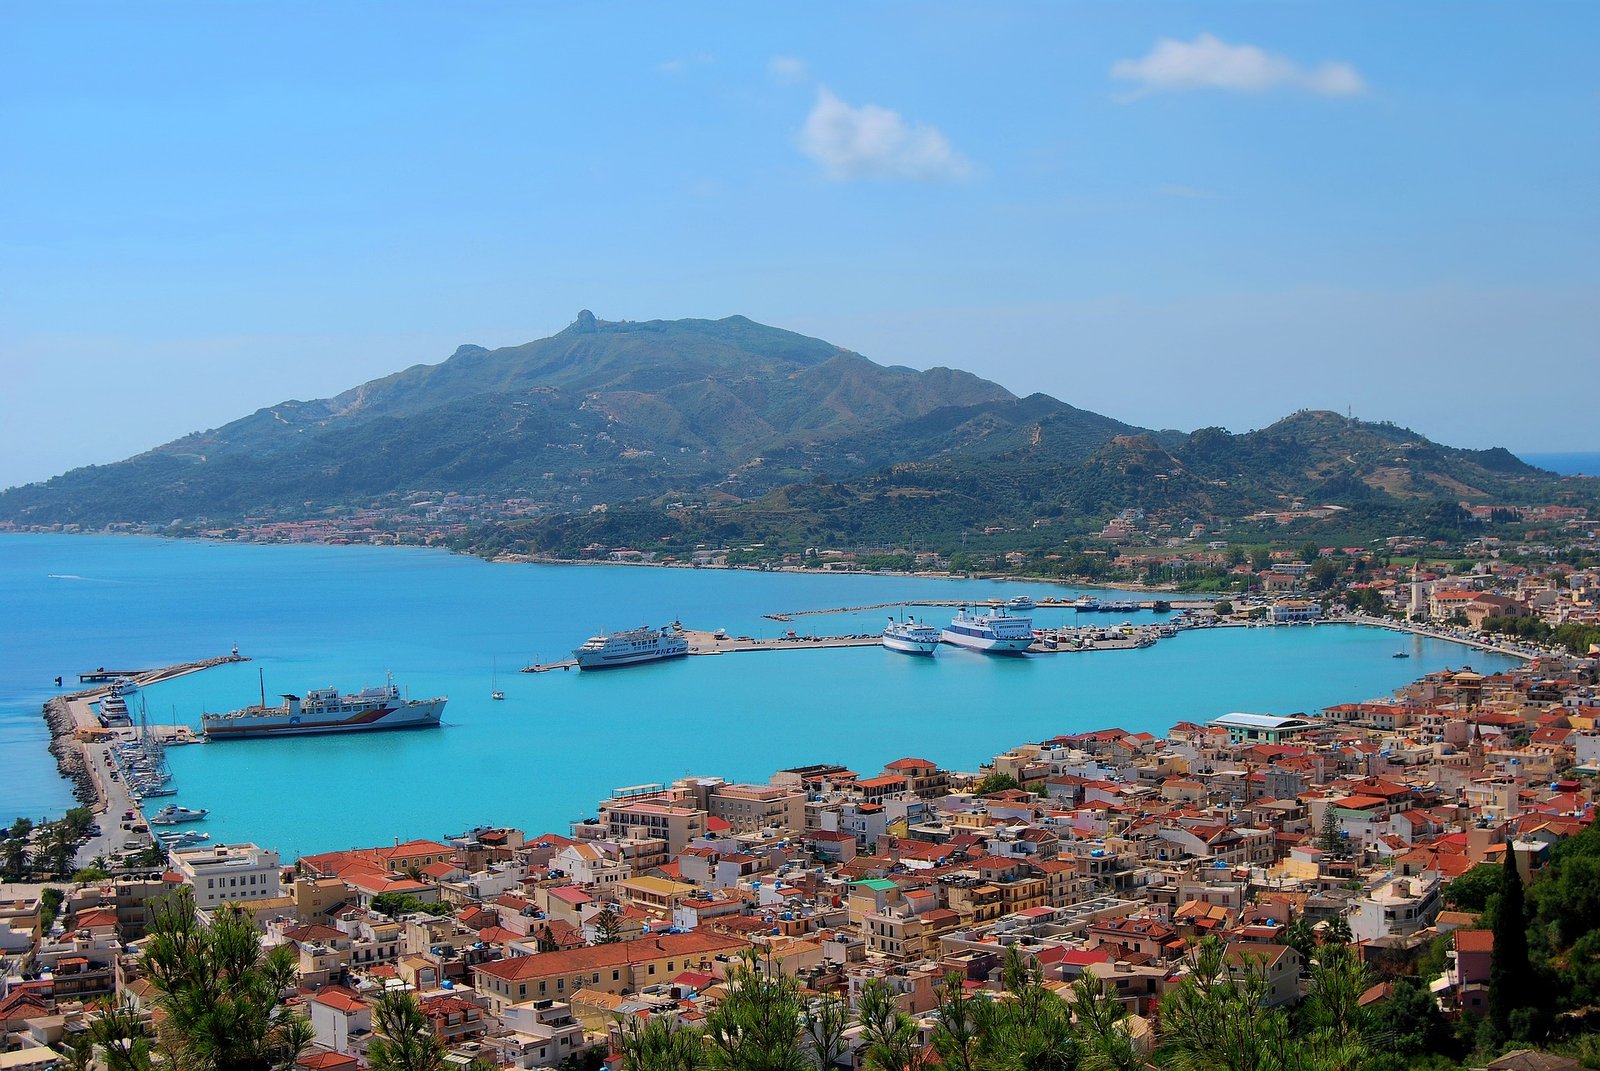 View of the Zakynthos town and port